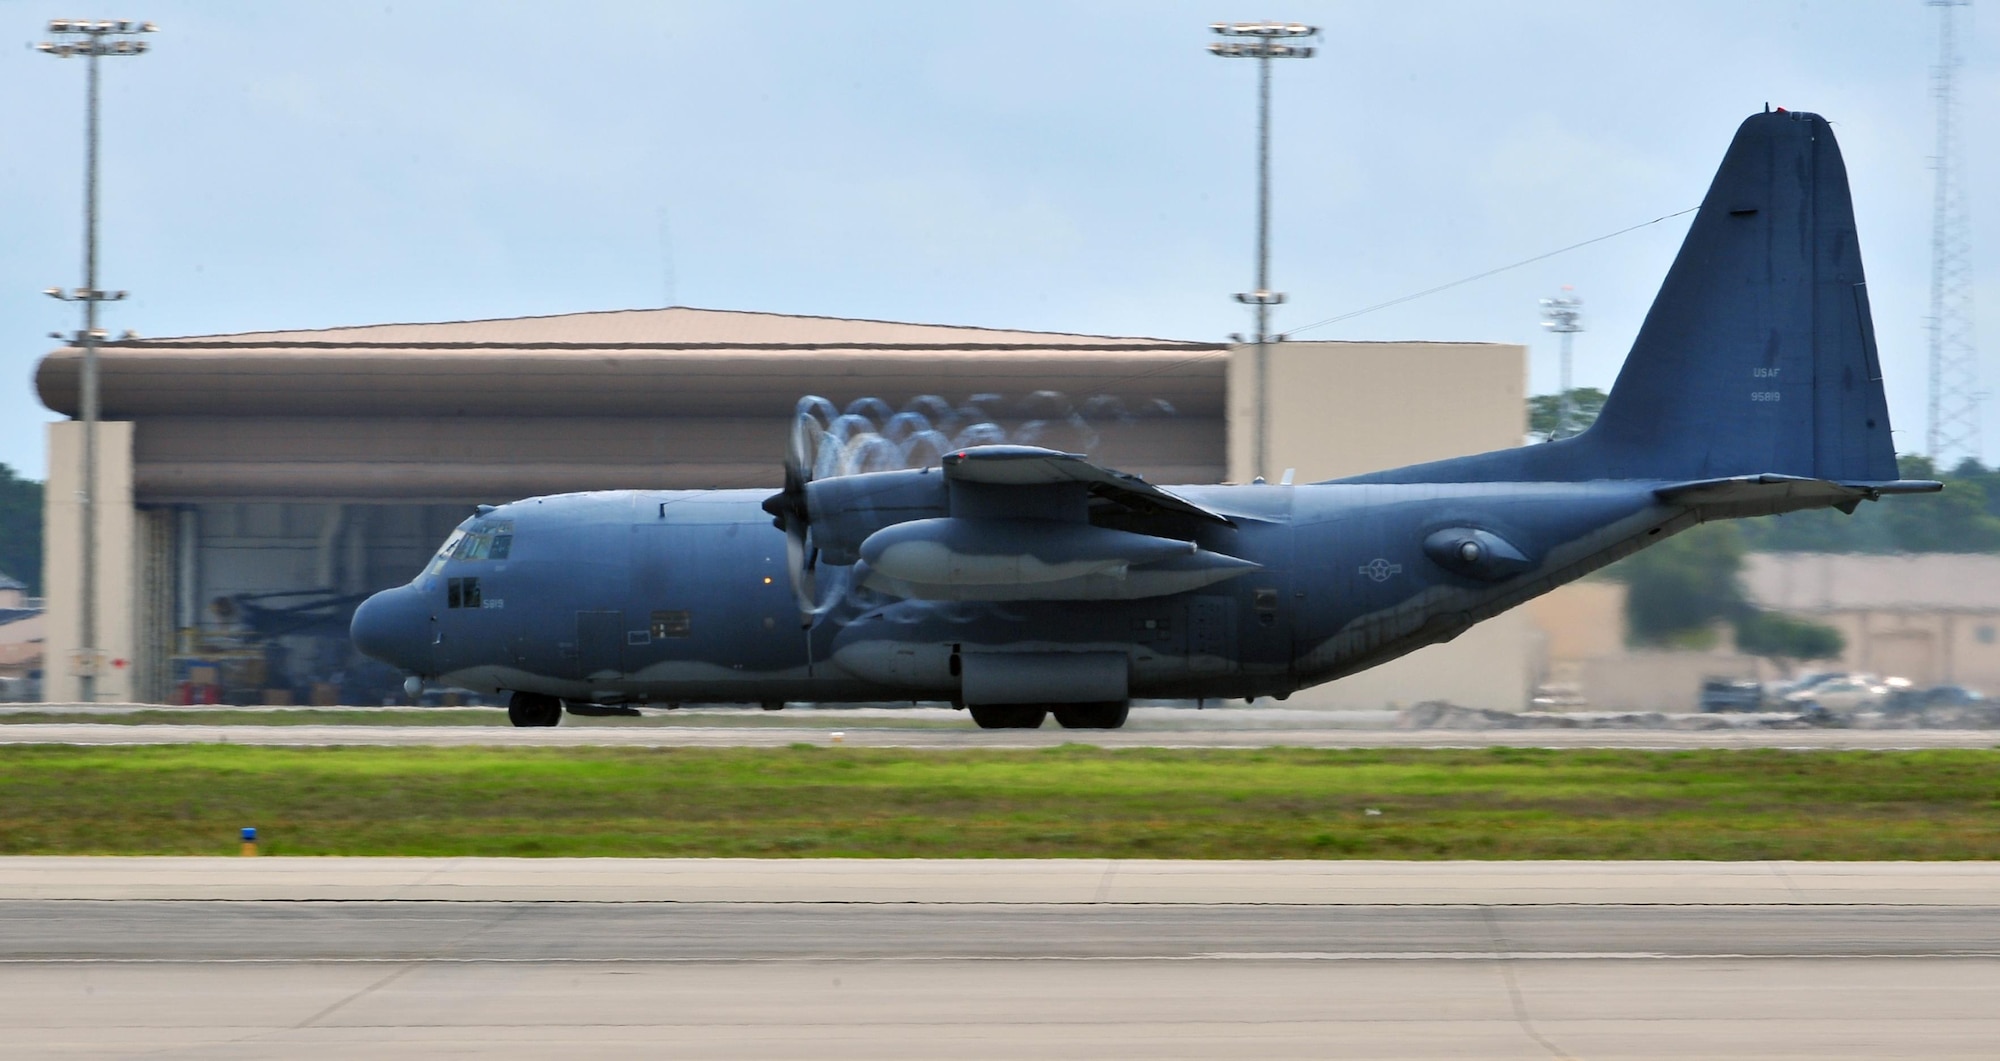 An MC-130P Combat Shadow takes off on its final flight, May 15, 2015, at Hurlburt Field, Fla. Built with 1960s technology, the MC-130P began its special operations career in the mid-1980s and went on to conduct critical air refueling missions in the late 1980s during Operation Just Cause in Panama and the early 1990s during Operation Desert Storm. (U.S. Air Force photo/Airman 1st Class Ryan Conroy) 